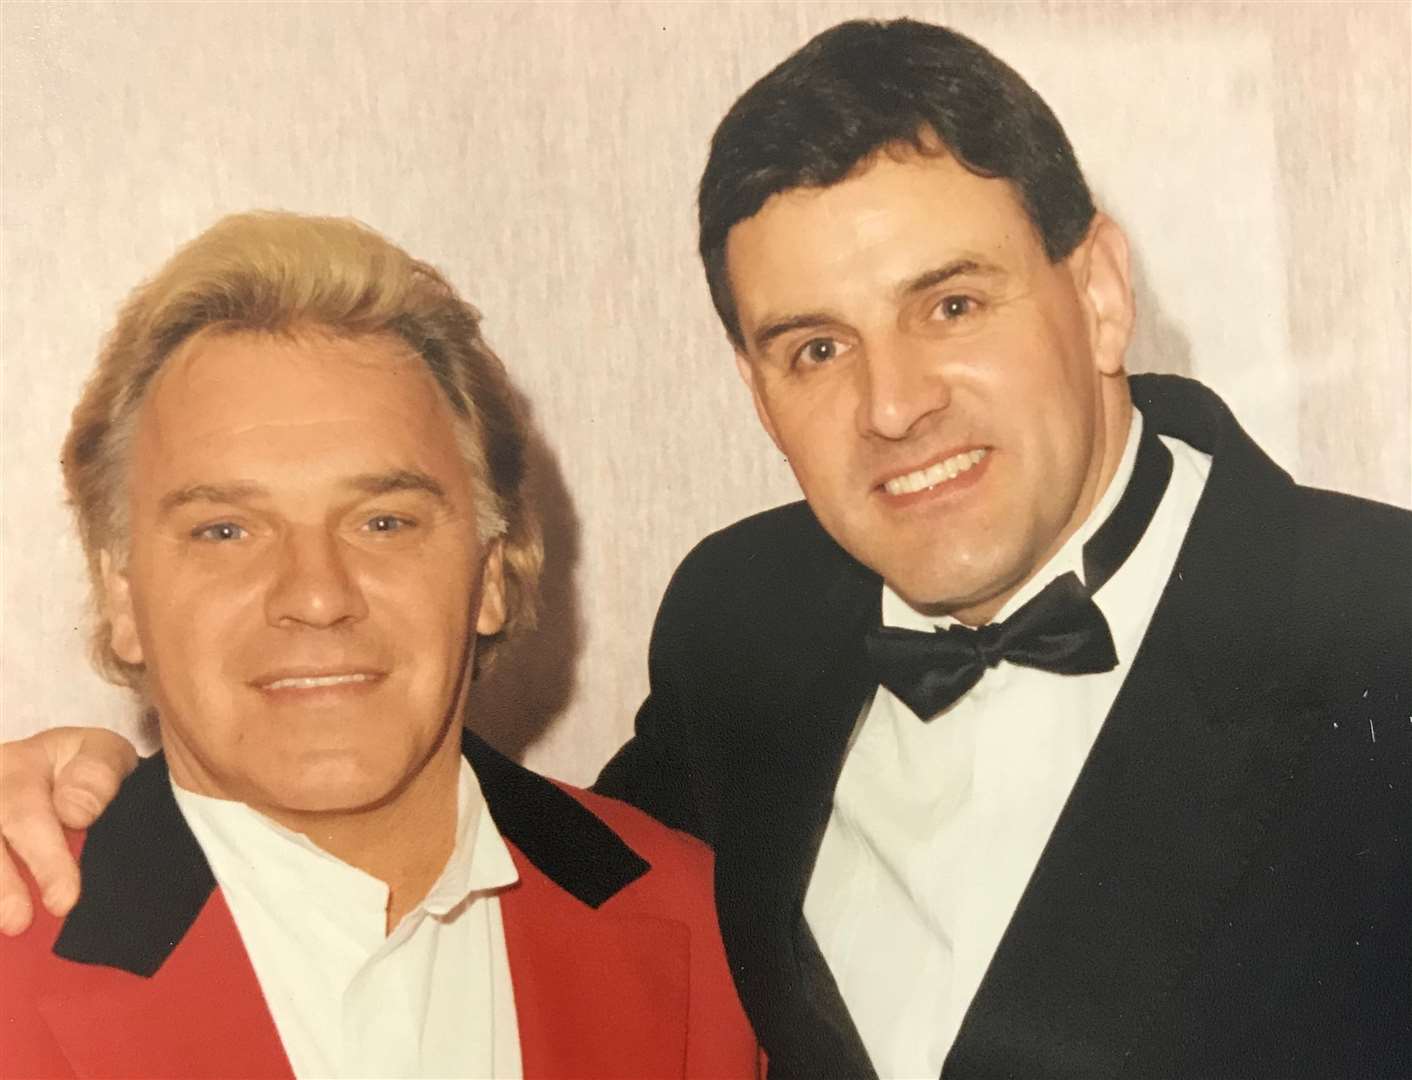 Ray photographed with Freddie Starr